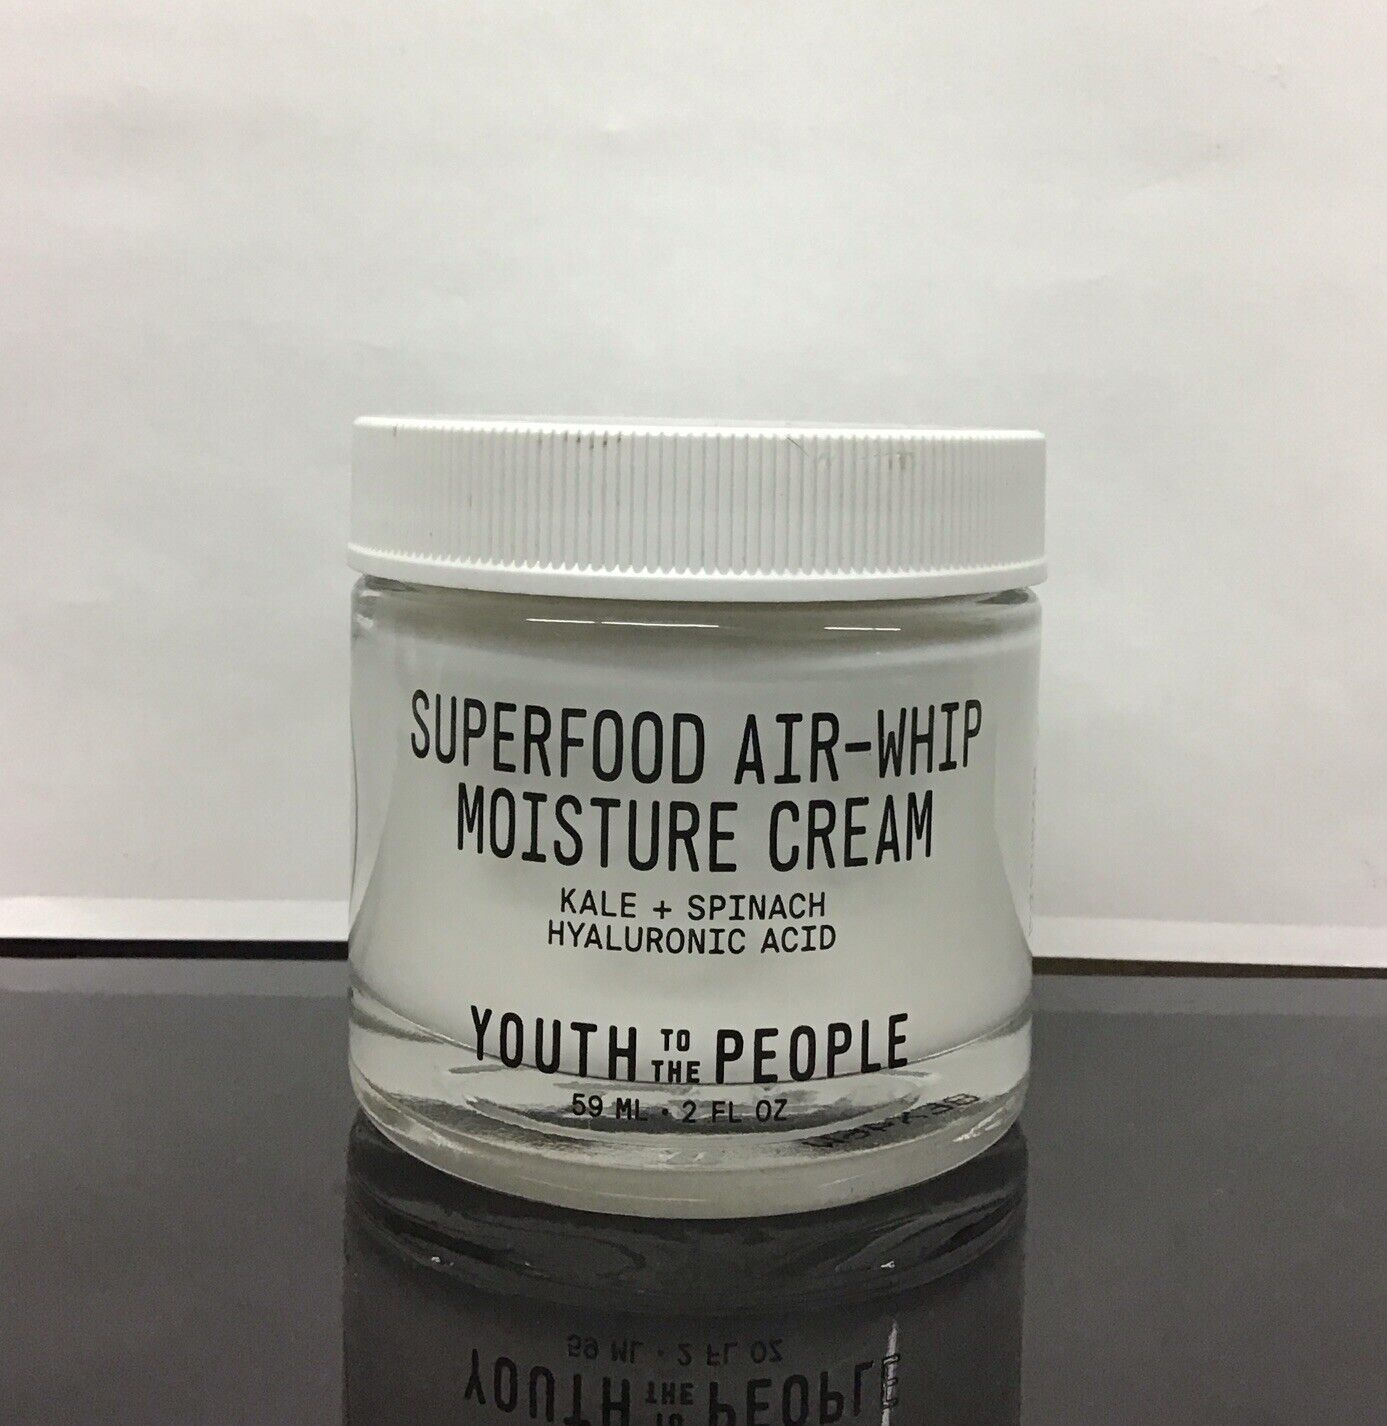 Youth To The People Superfood Air-Whip Moisture Cream 2 Fl Oz, As Pictured.